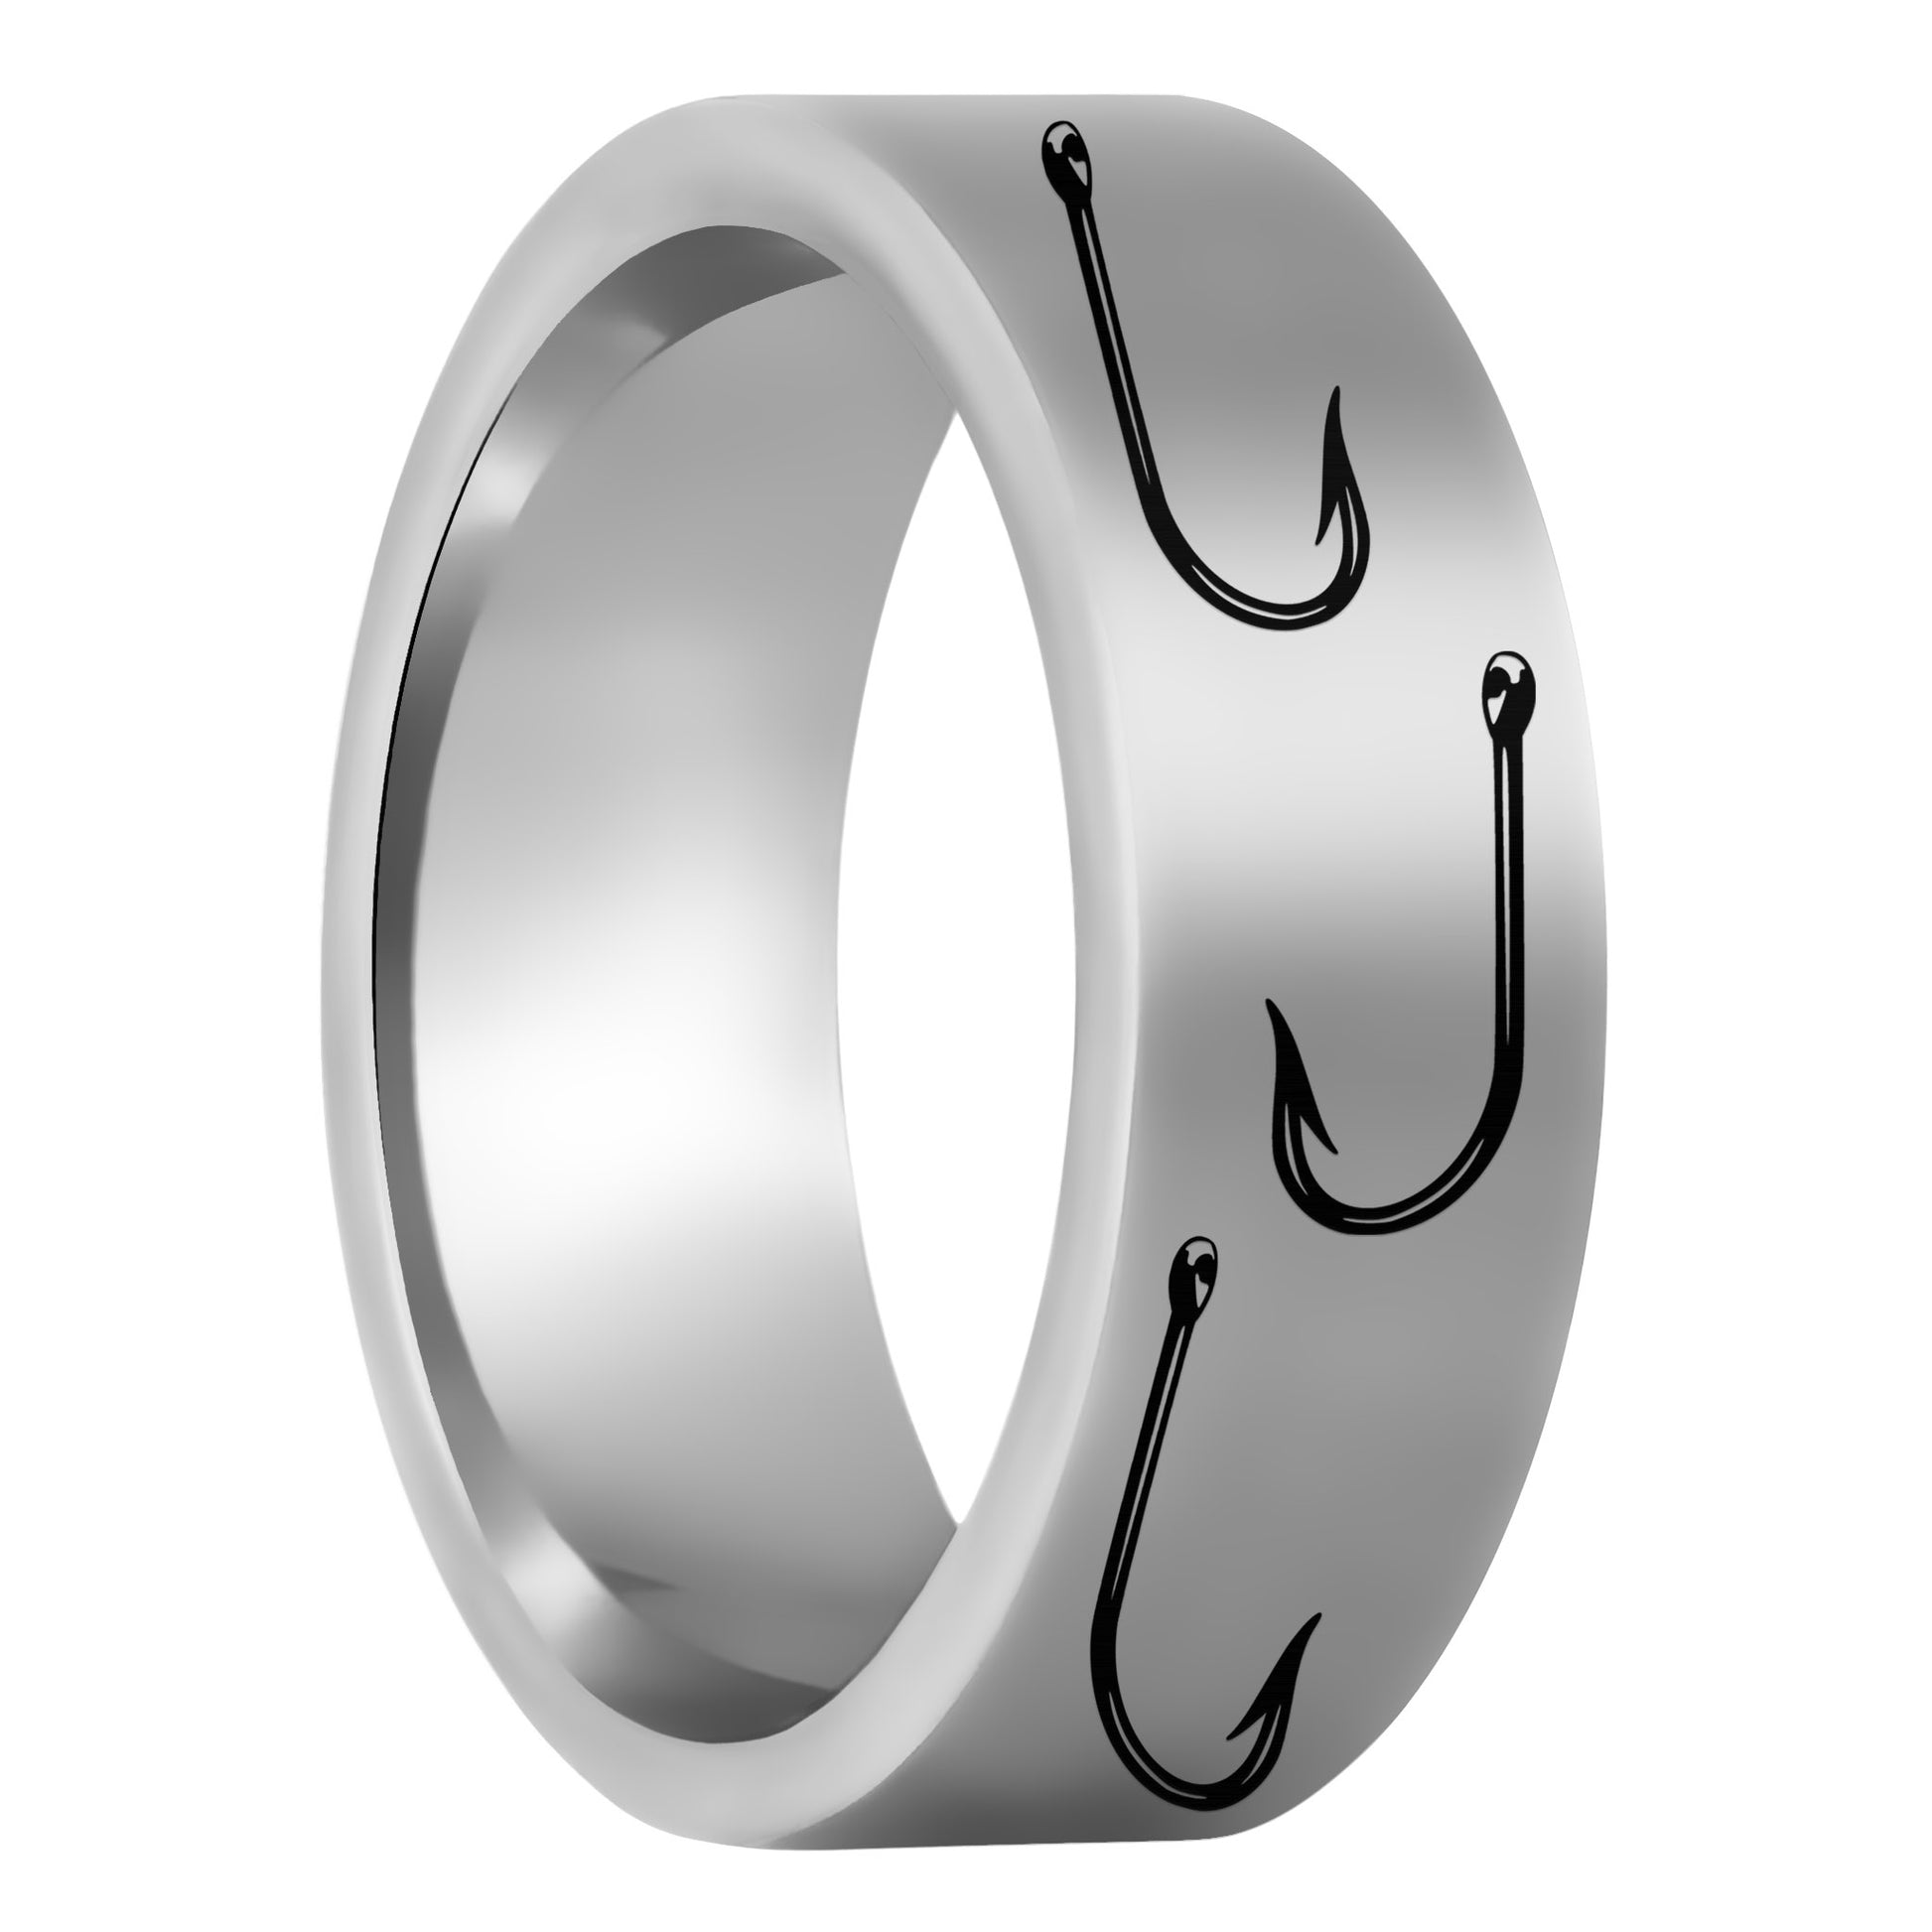 One Fishing Hook Tungsten Men's Wedding Band displayed on a plain white background